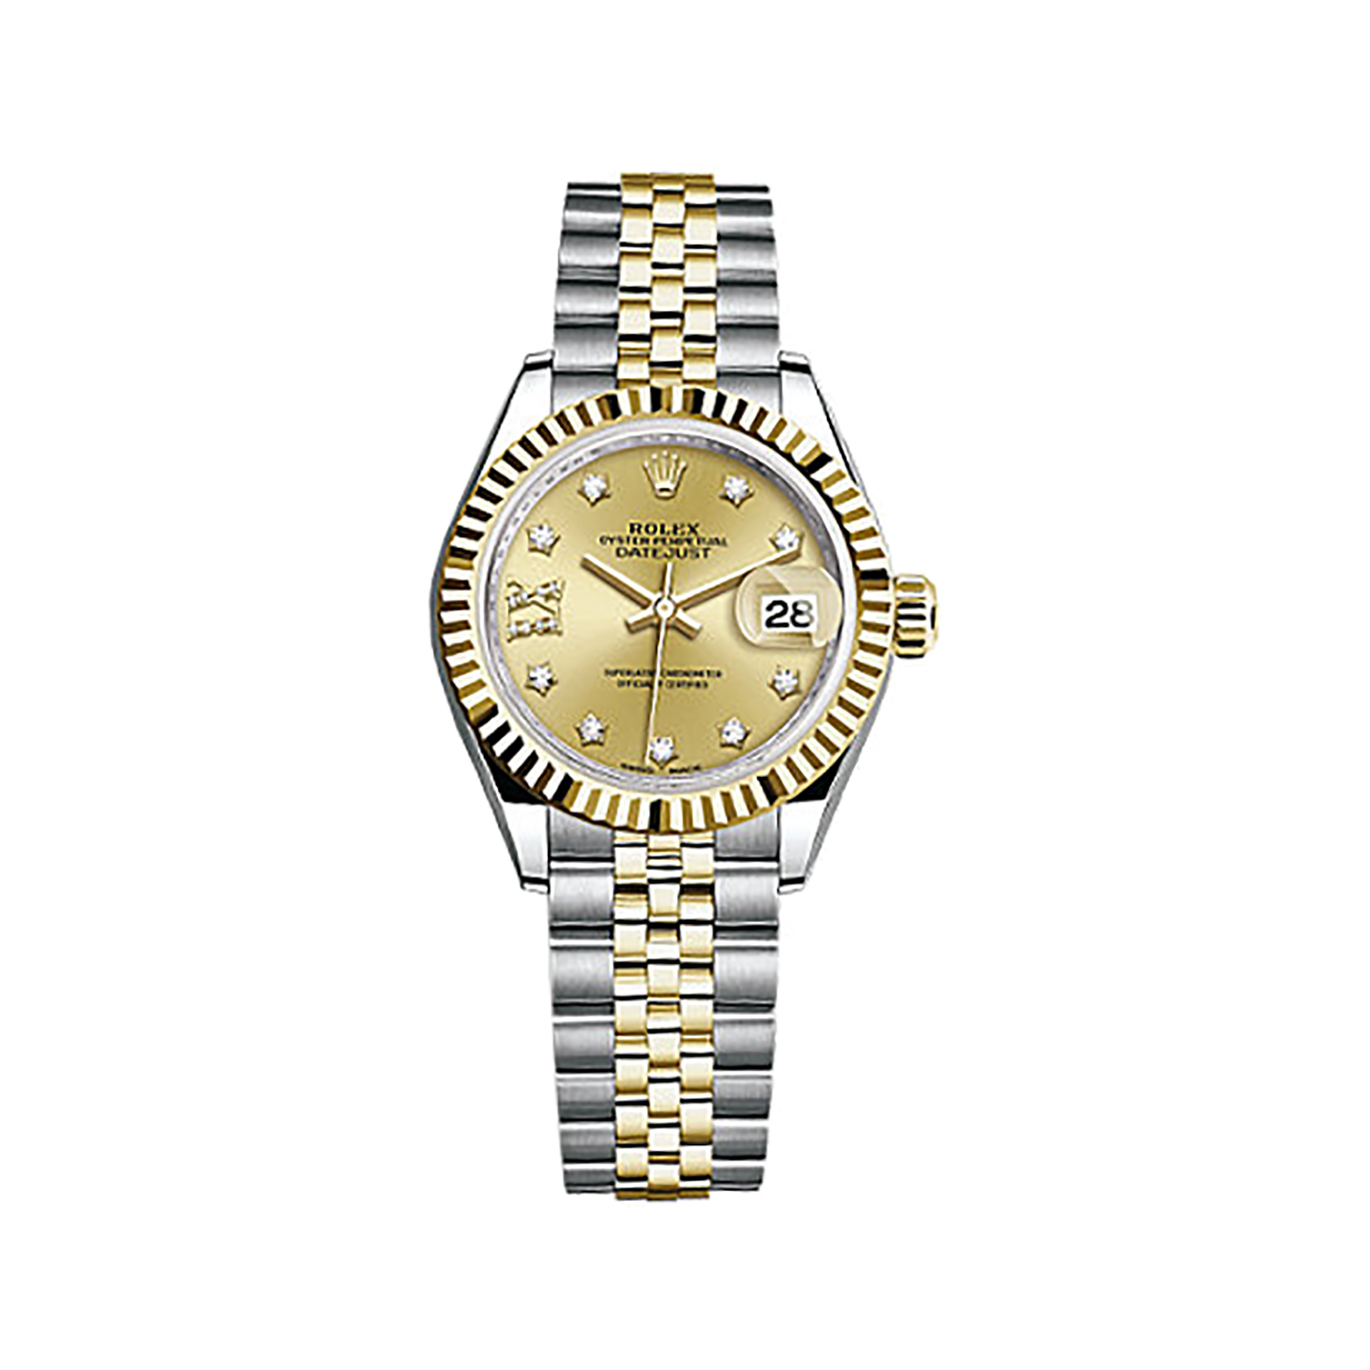 Lady-Datejust 28 279173 Gold & Stainless Steel Watch (Champagne Set with Diamonds)